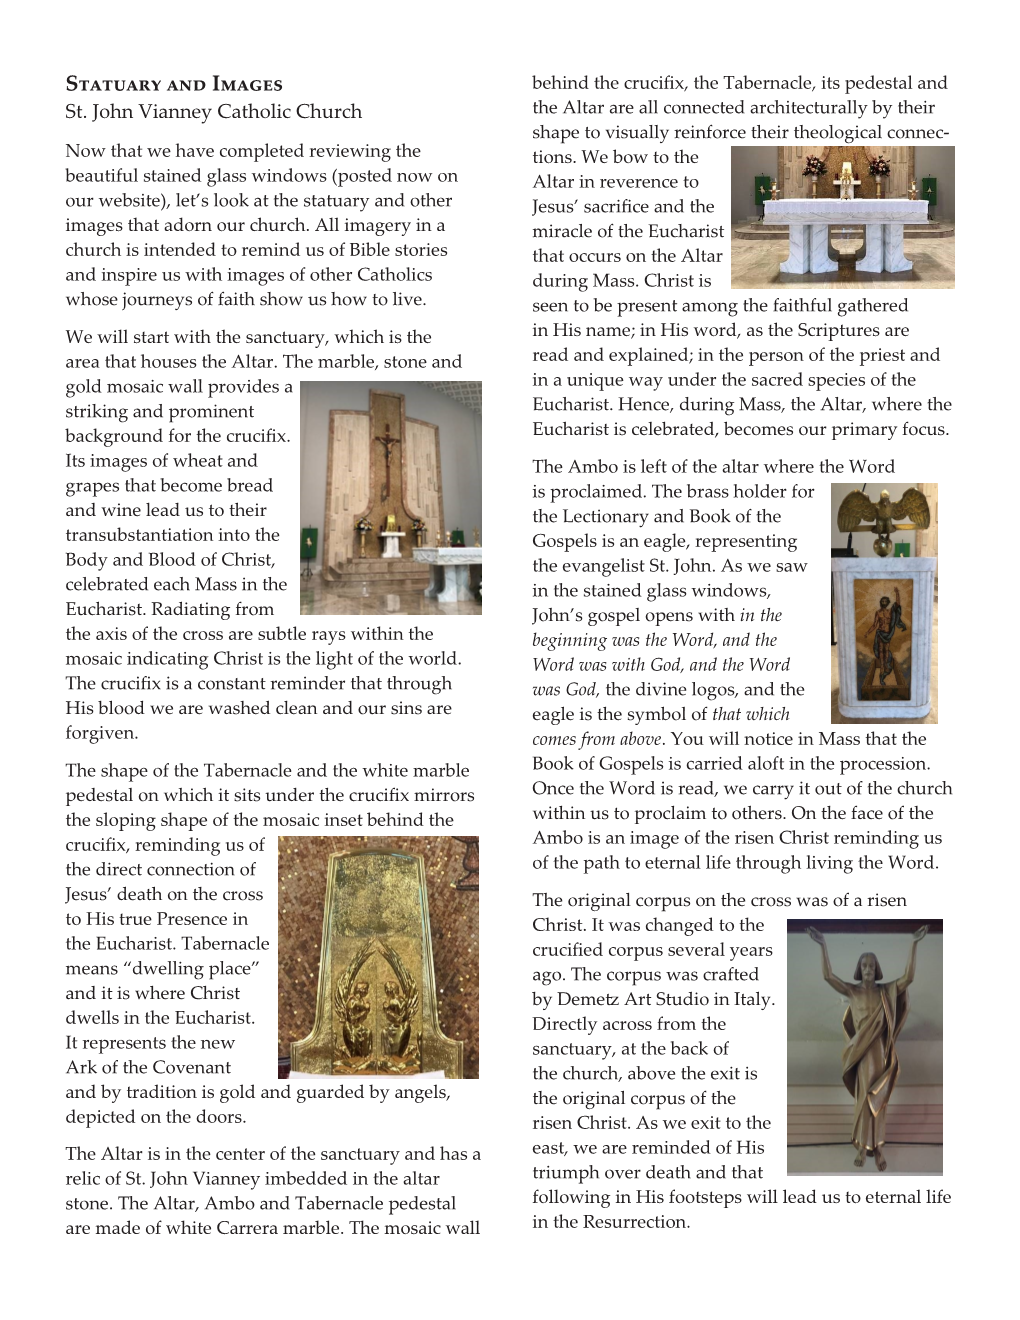 Statuary and Images Behind the Crucifix, the Tabernacle, Its Pedestal and St